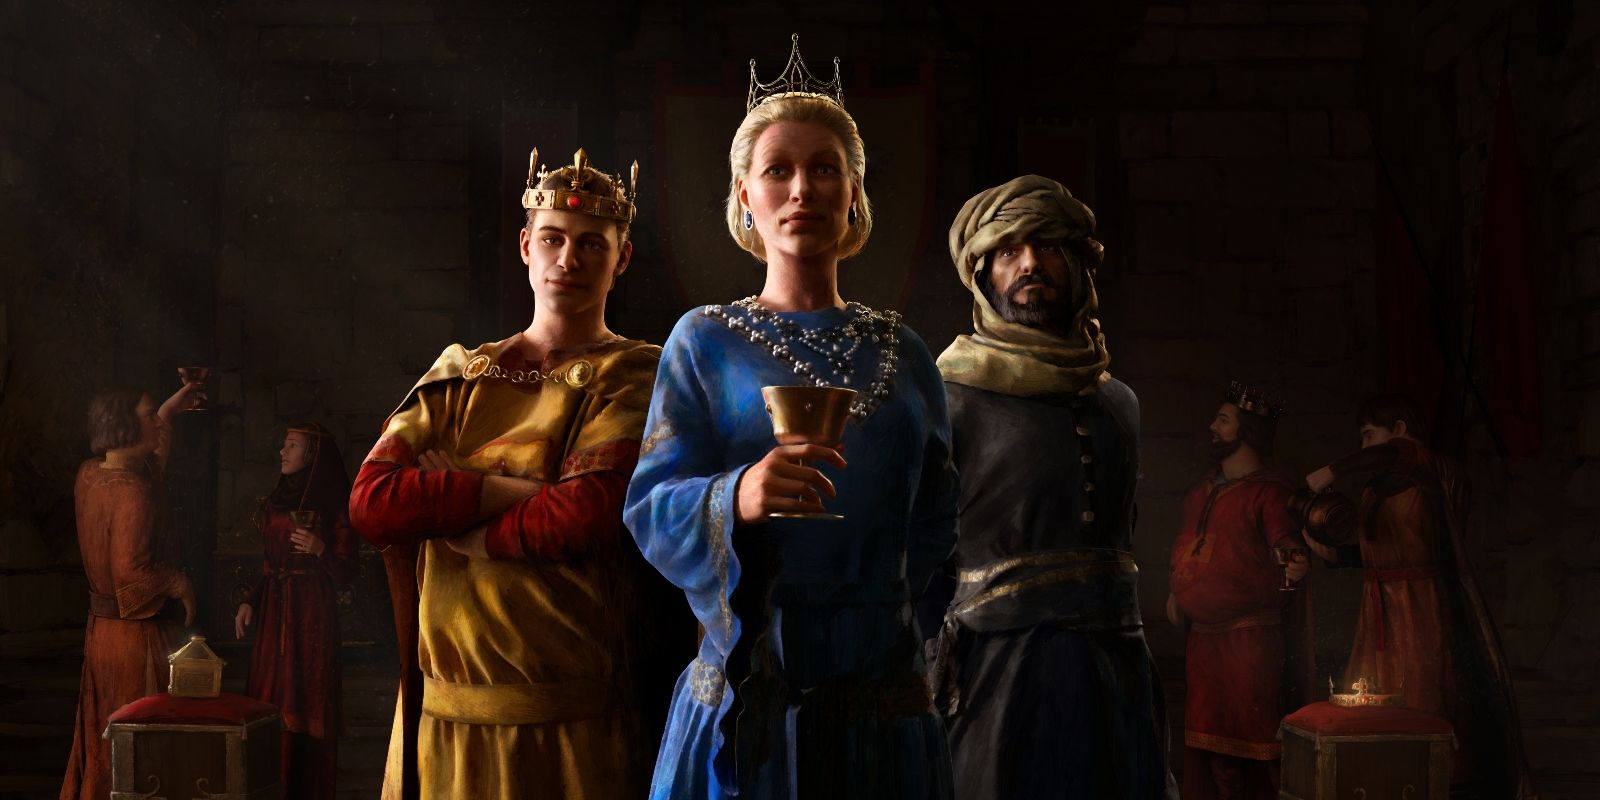 A promotional image for Crusader Kings III game